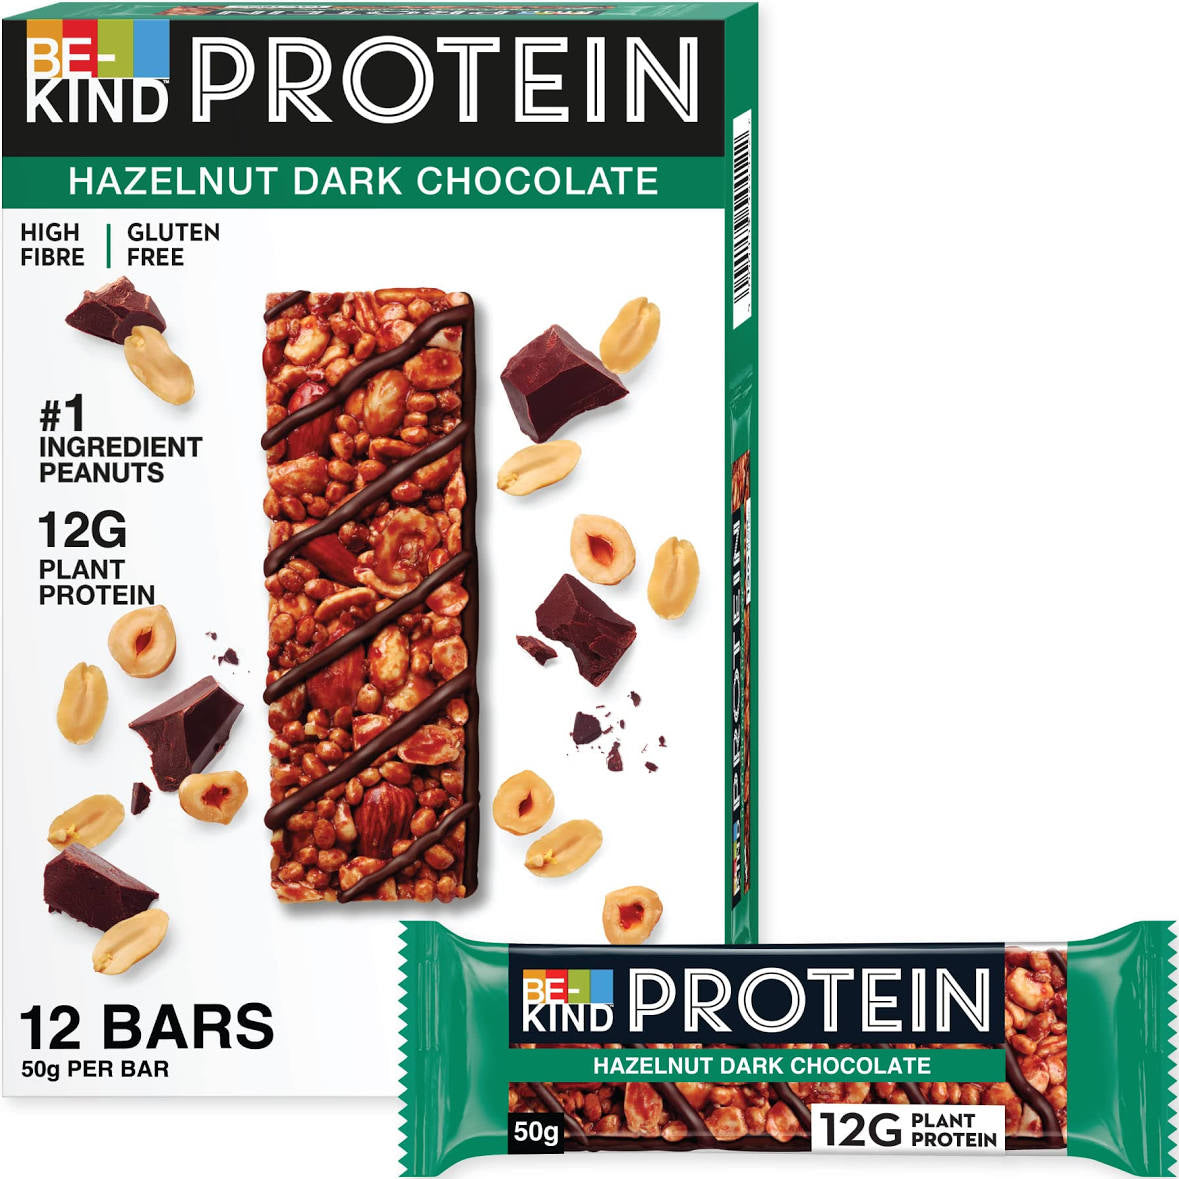 BE-KIND PROTEIN BARRETTE